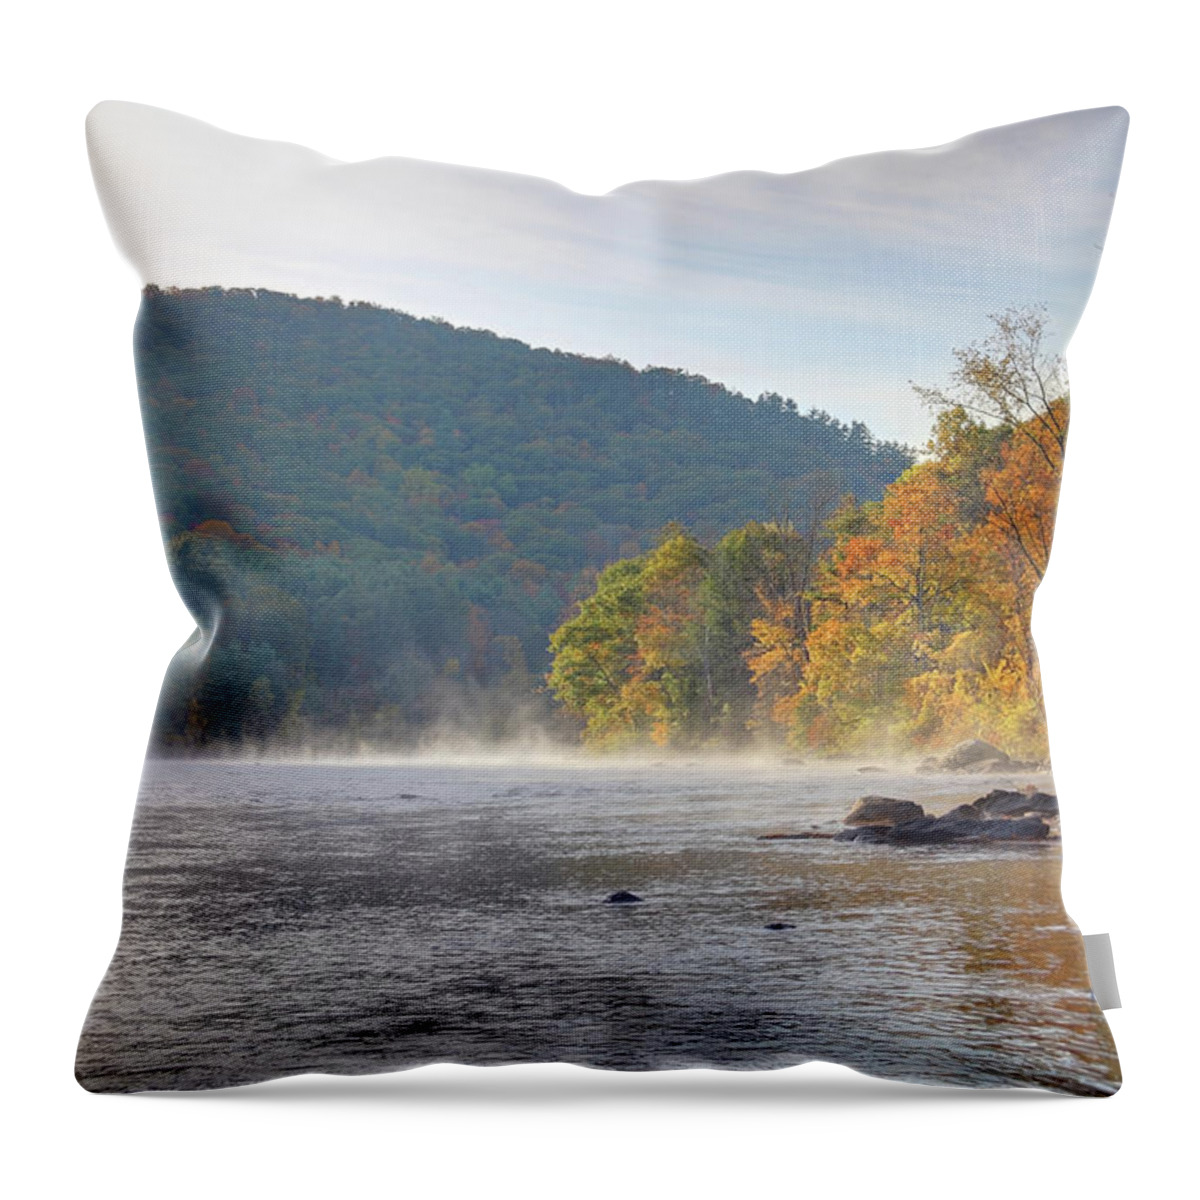 Scenics Throw Pillow featuring the photograph Fall Foliage In The Litchfield Hills Of by Denistangneyjr